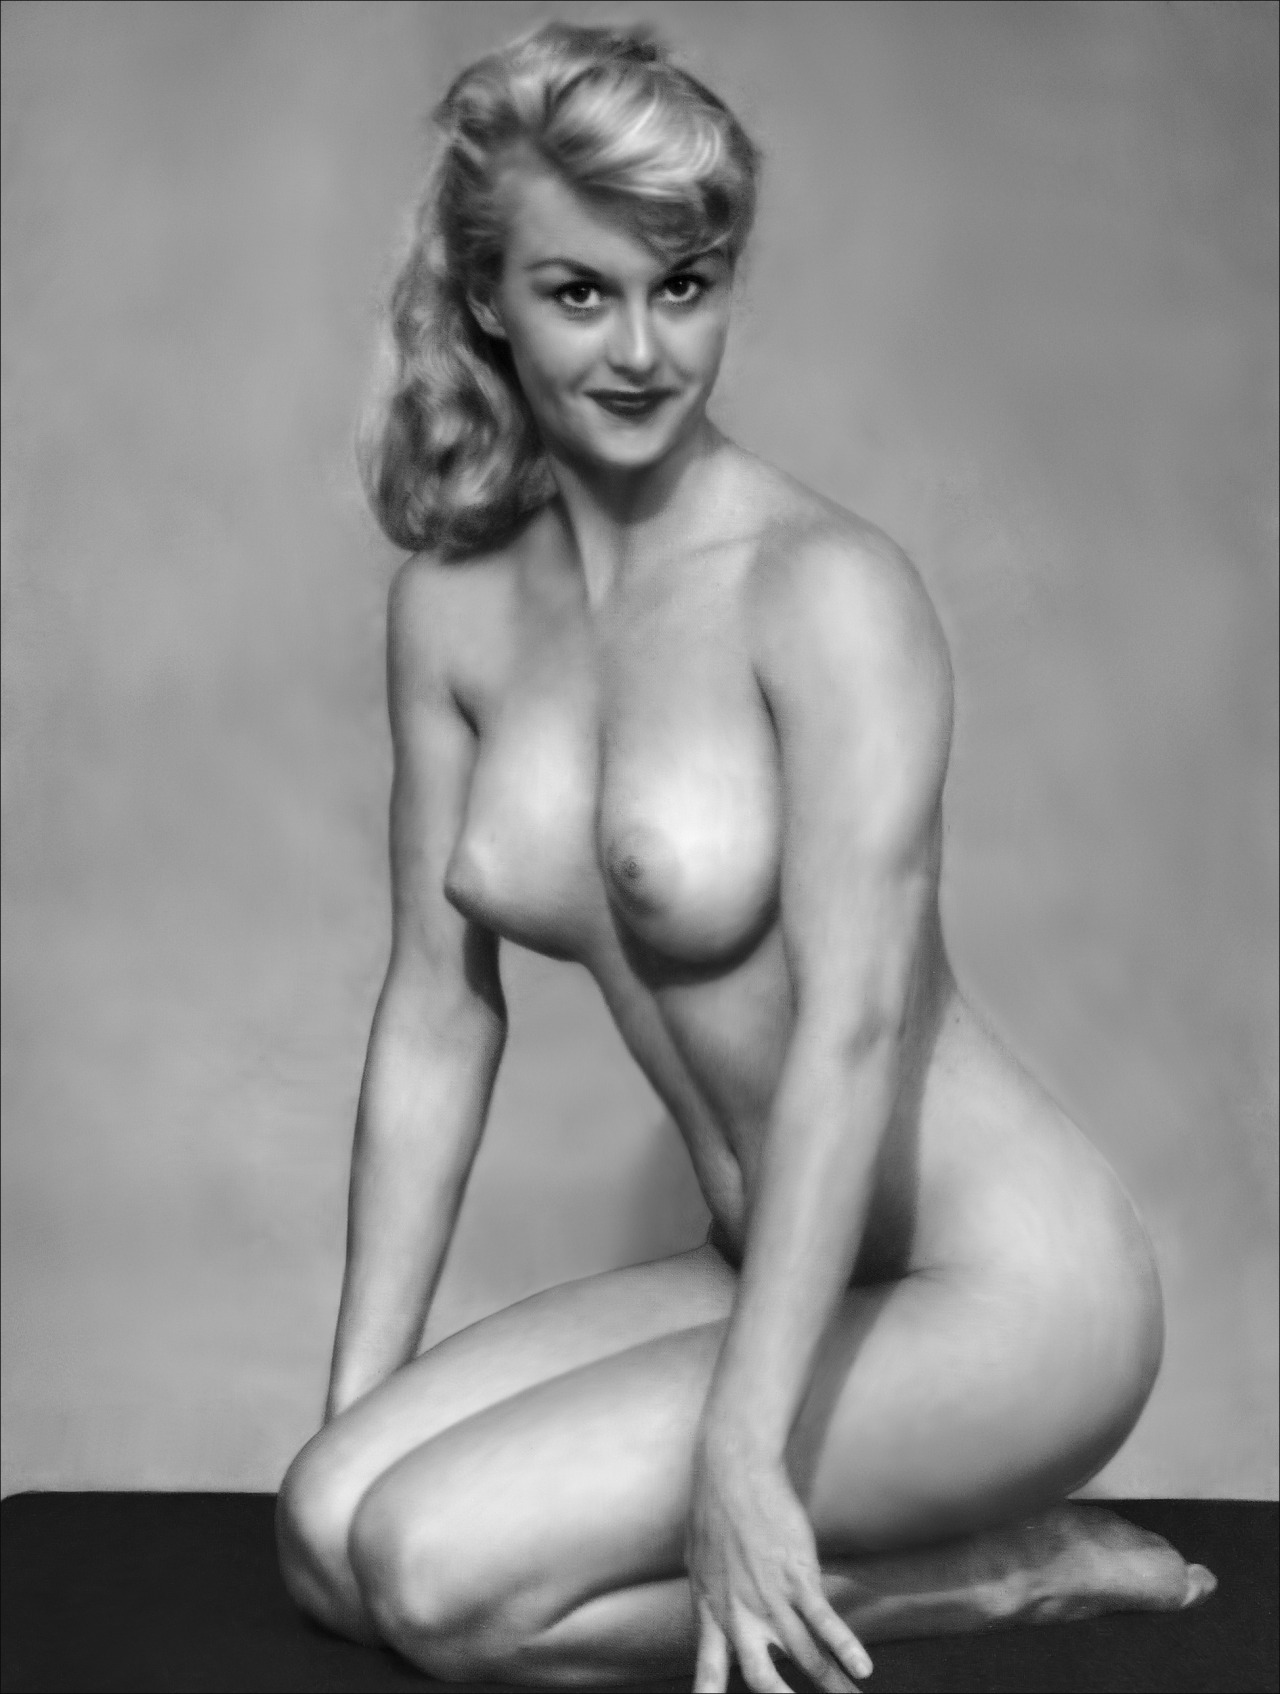 50s pinup style hotty. 